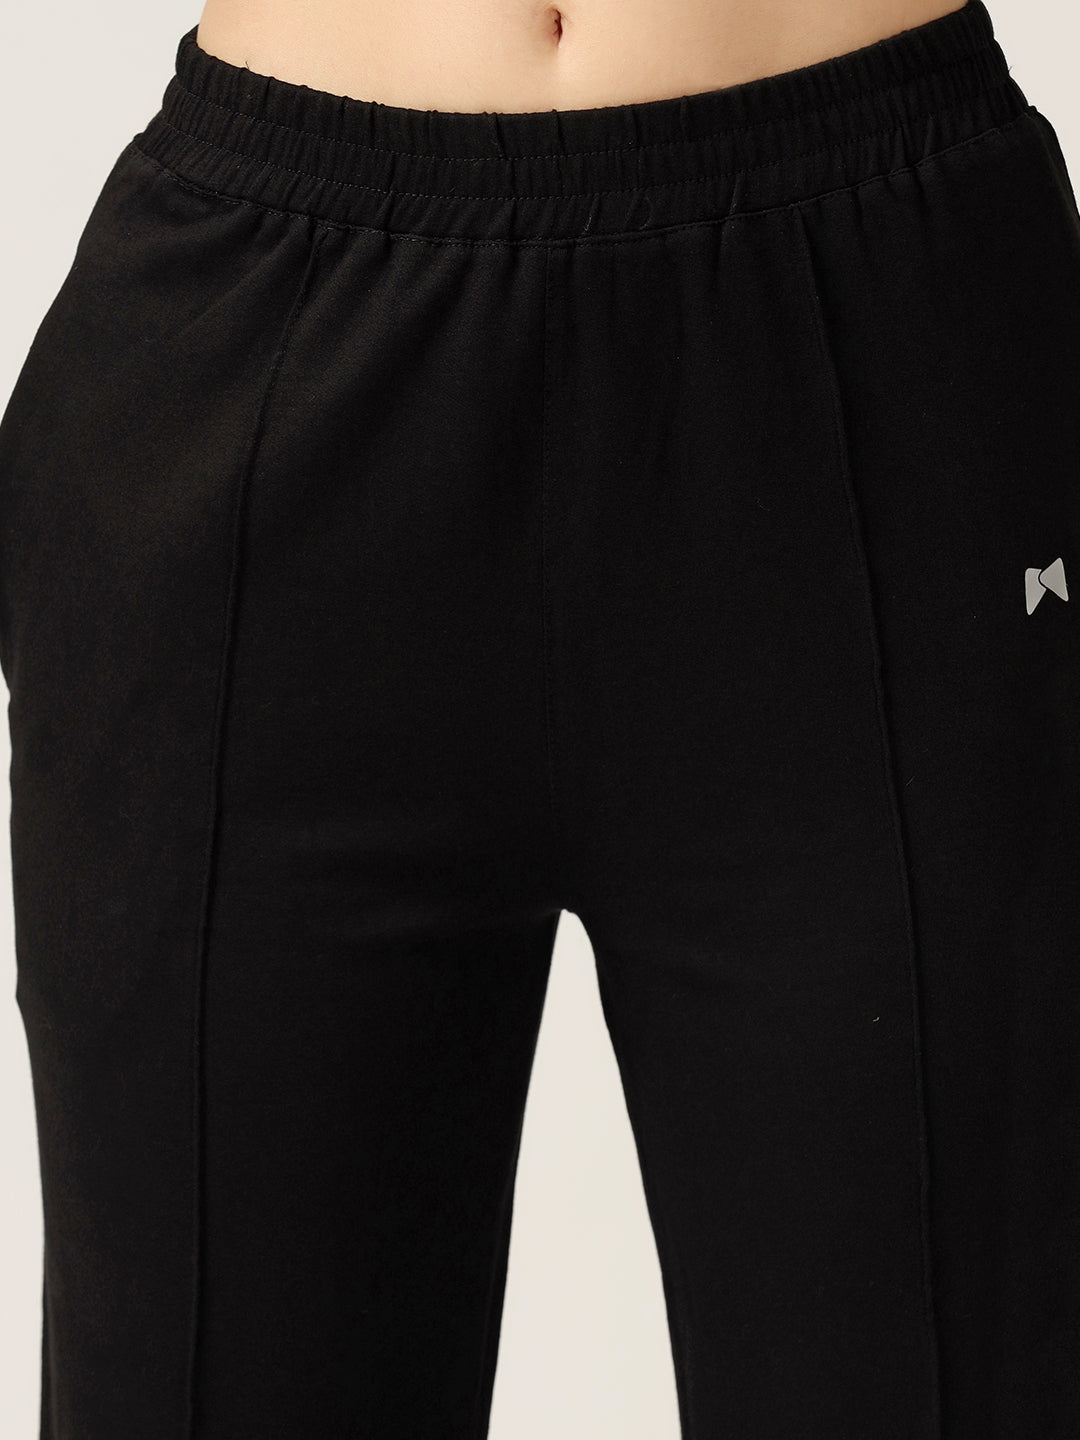 All Day Comfort Cotton Pant - Black